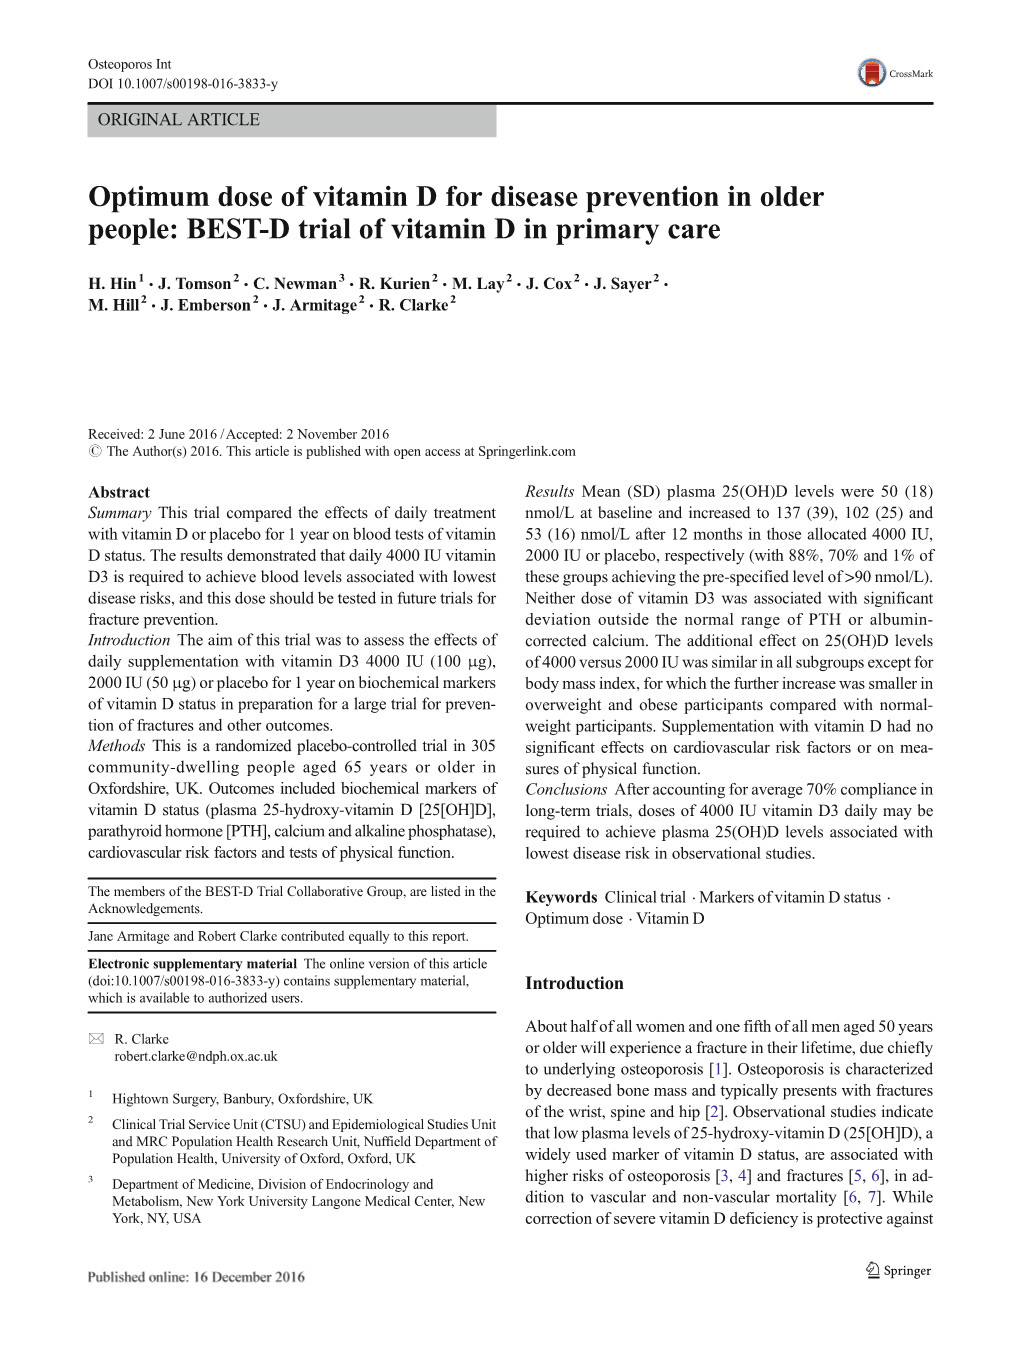 BEST-D Trial of Vitamin D in Primary Care